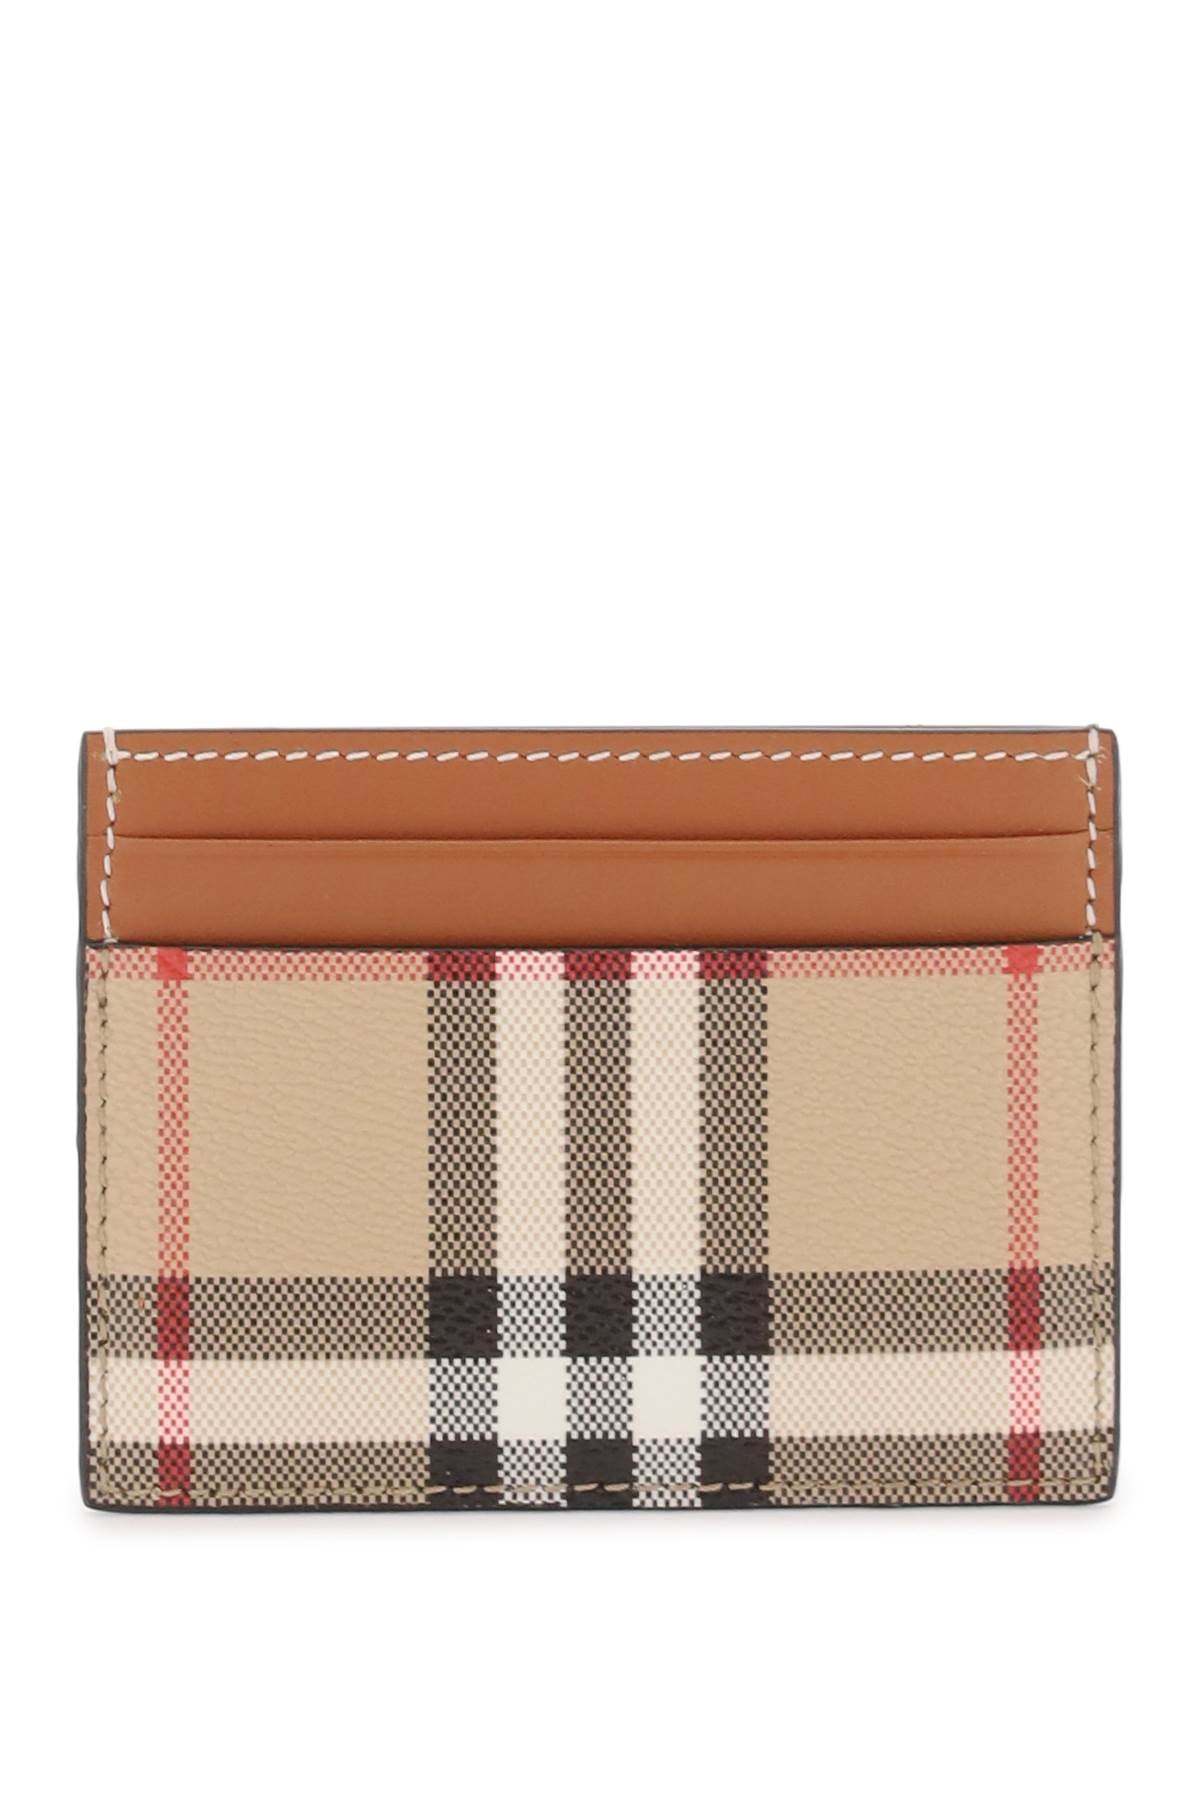 Burberry Burberry card holder with tartan pattern